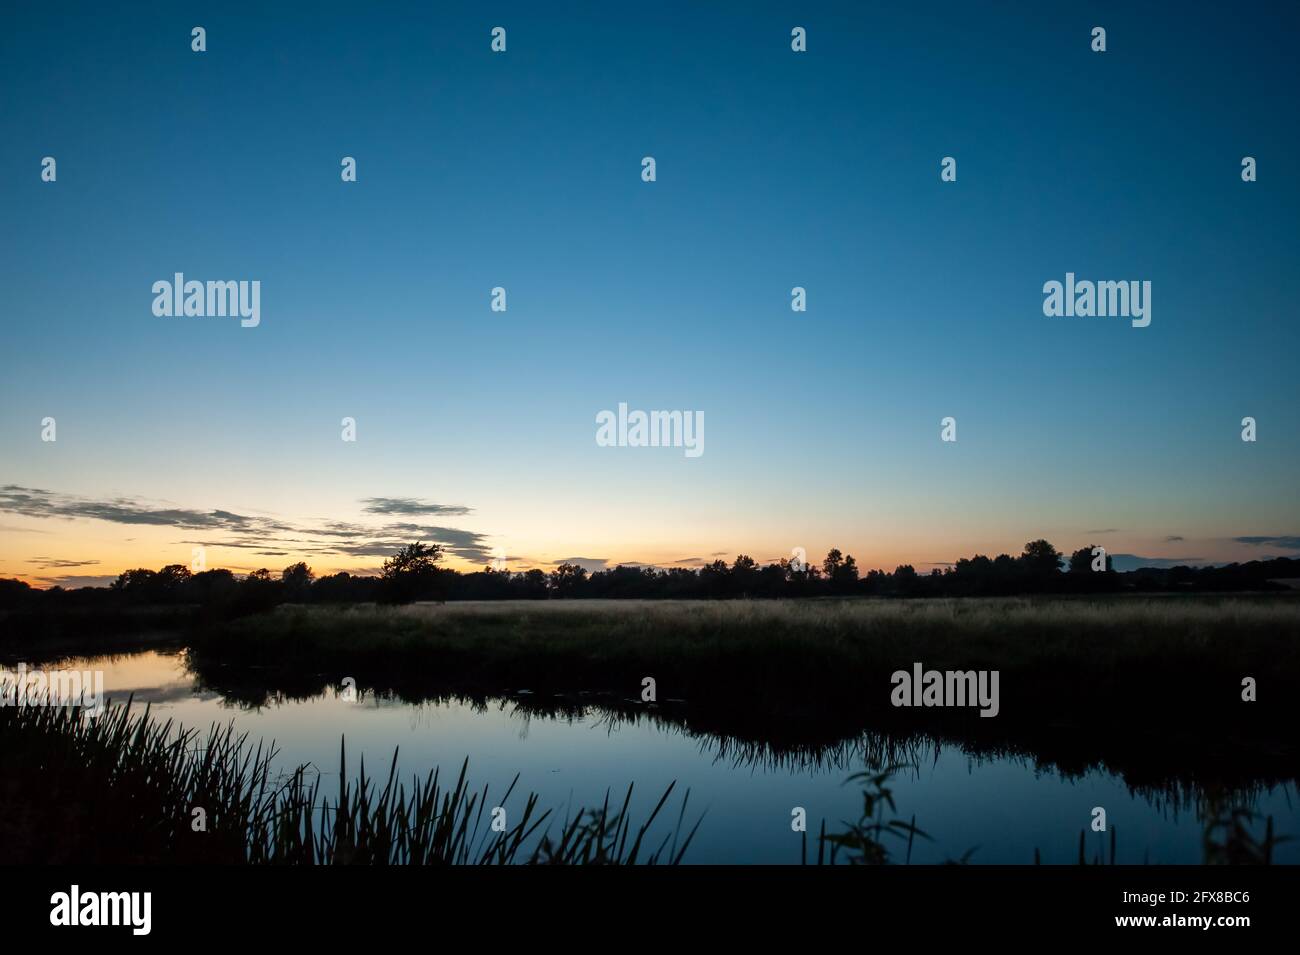 Riverside and clear sky after dusk in summer with reeds, trees and reflections in water, evening sunset Stock Photo